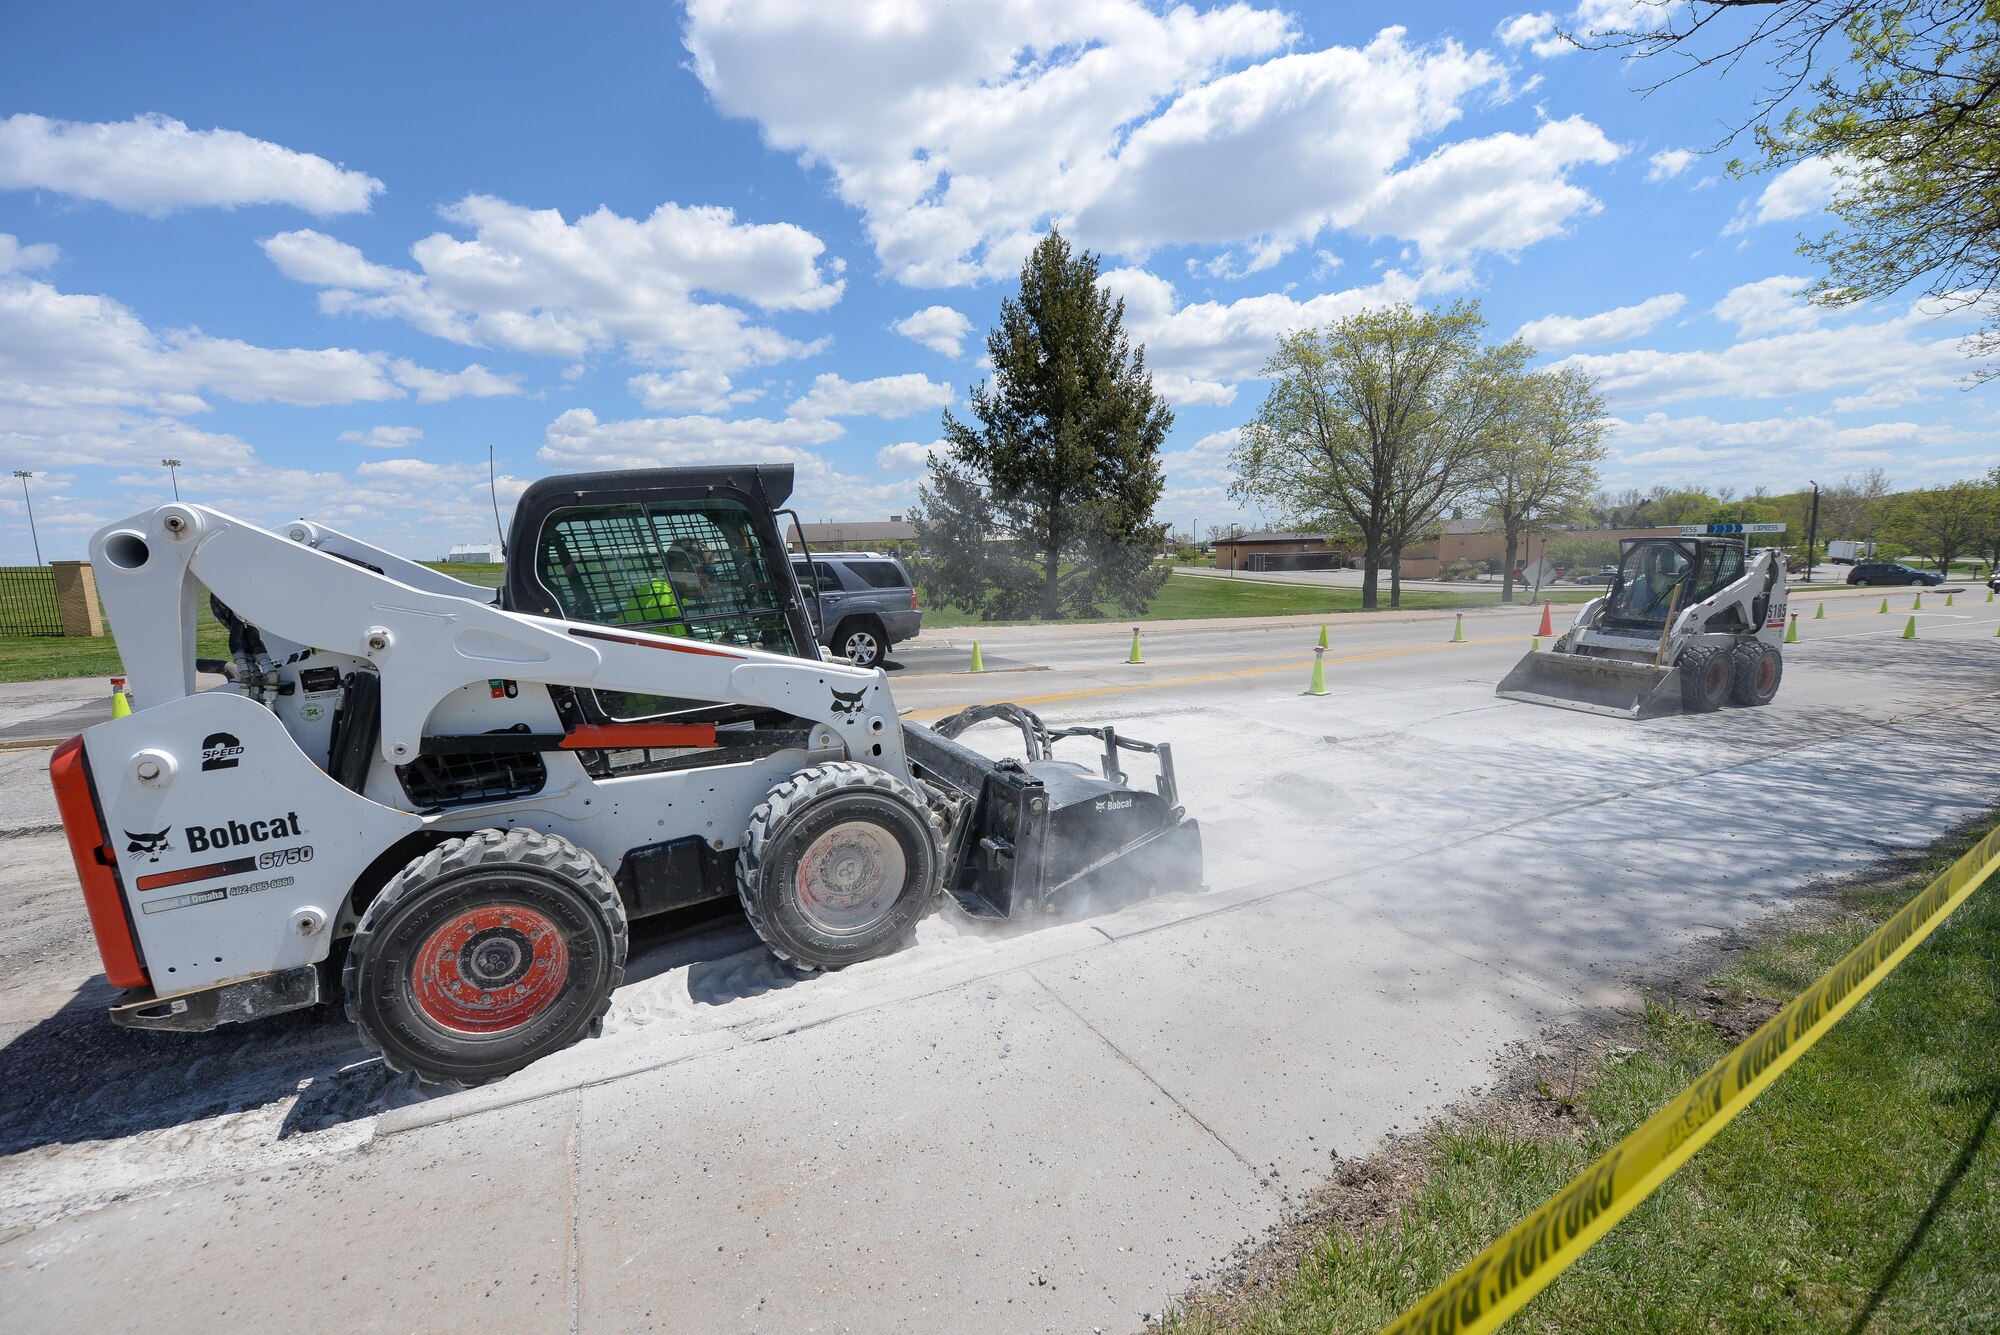 Members of the 55th Civil Engineer Squadron’s pavement and equipment team make repairs to SAC Blvd. May 3. Their 14-man crew is responsibility for all road, parking lot and runway repairs along with several other construction jobs. (U.S. Air Force photo by Zach Hada)